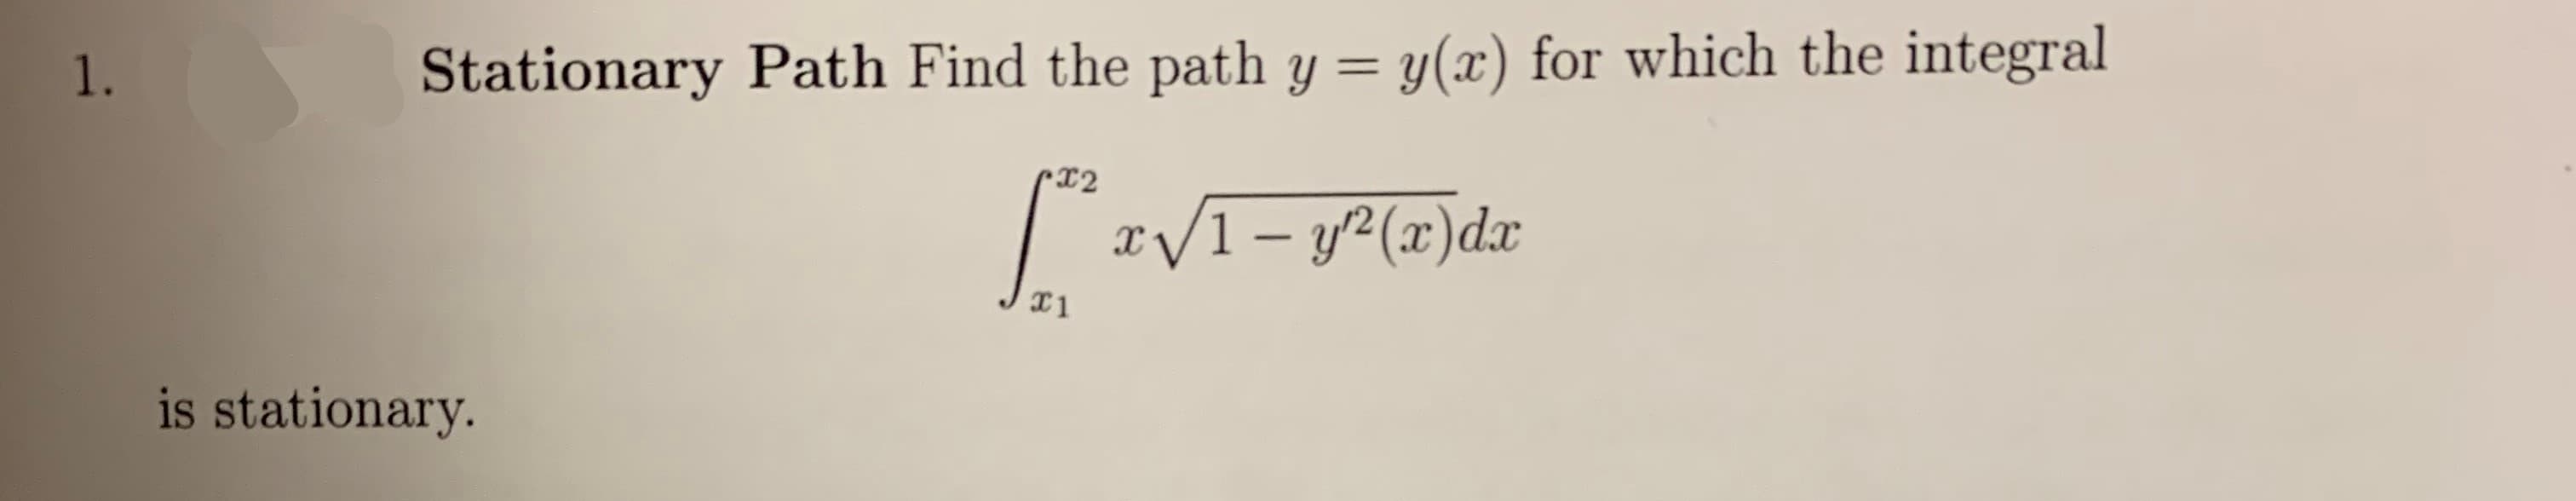 y(x) for which the integral
Stationary Path Find the path y
1.
X2
I/1-y2(x)dx
X1
is stationary.
